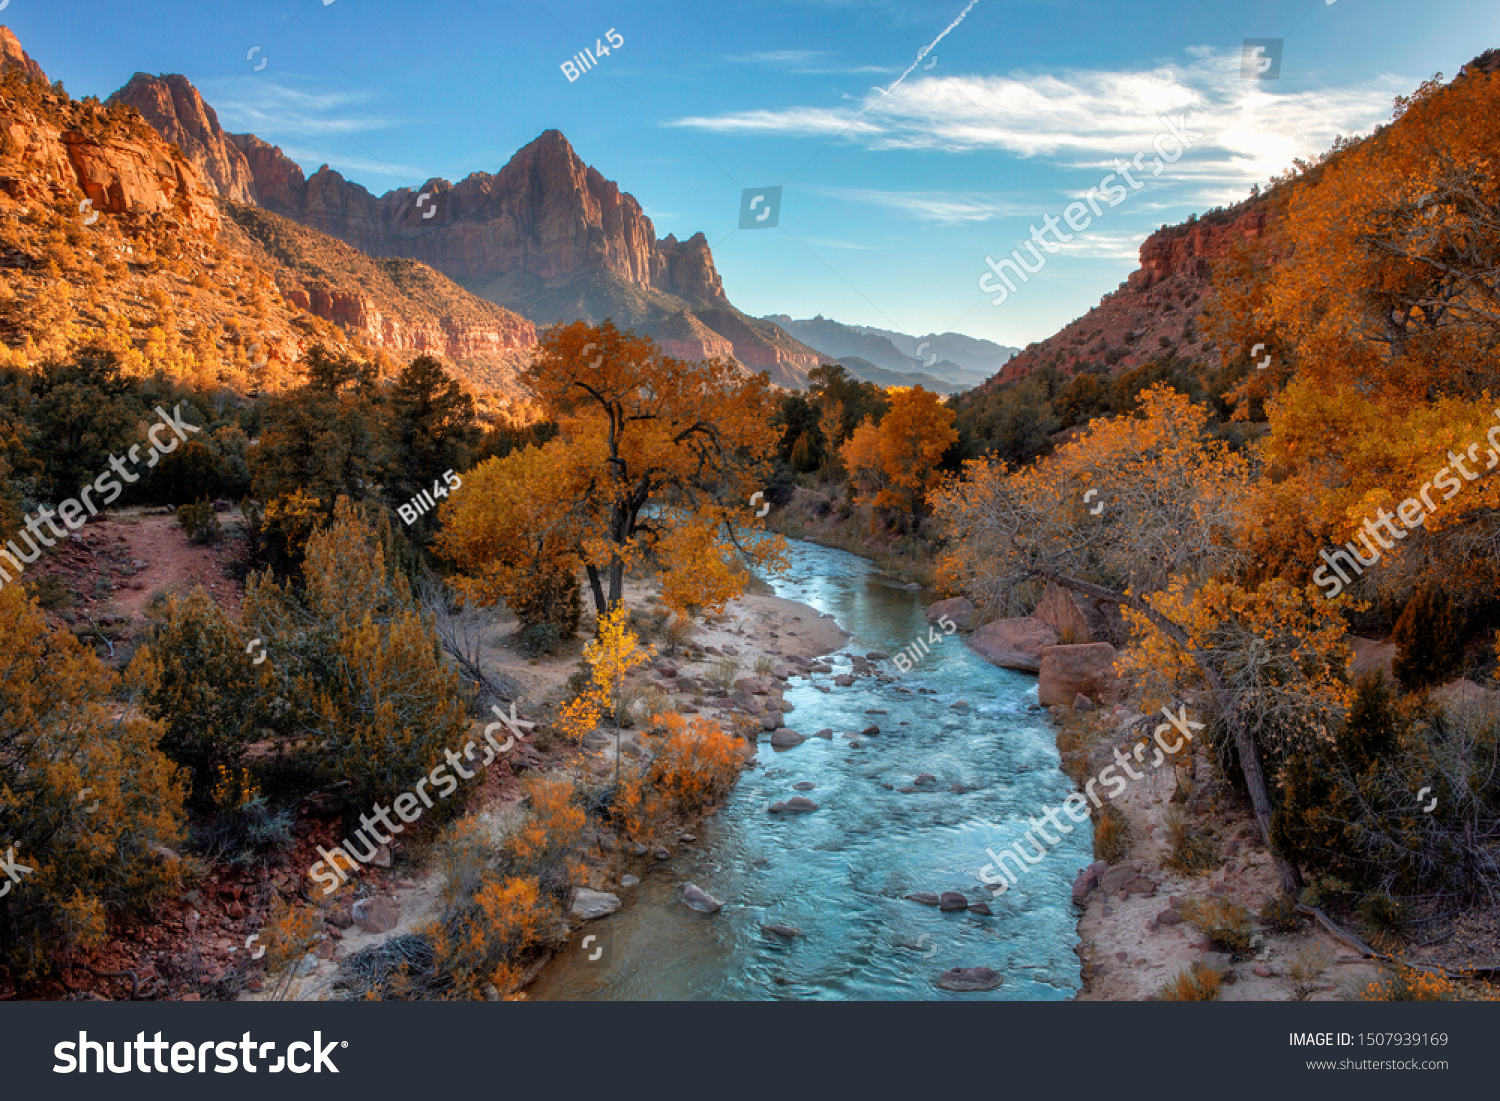 View of the Watchman mountain and the virgin river in Zion National Park located in the Southwestern United States, near Springdale, Utah, Arizona #1507939169